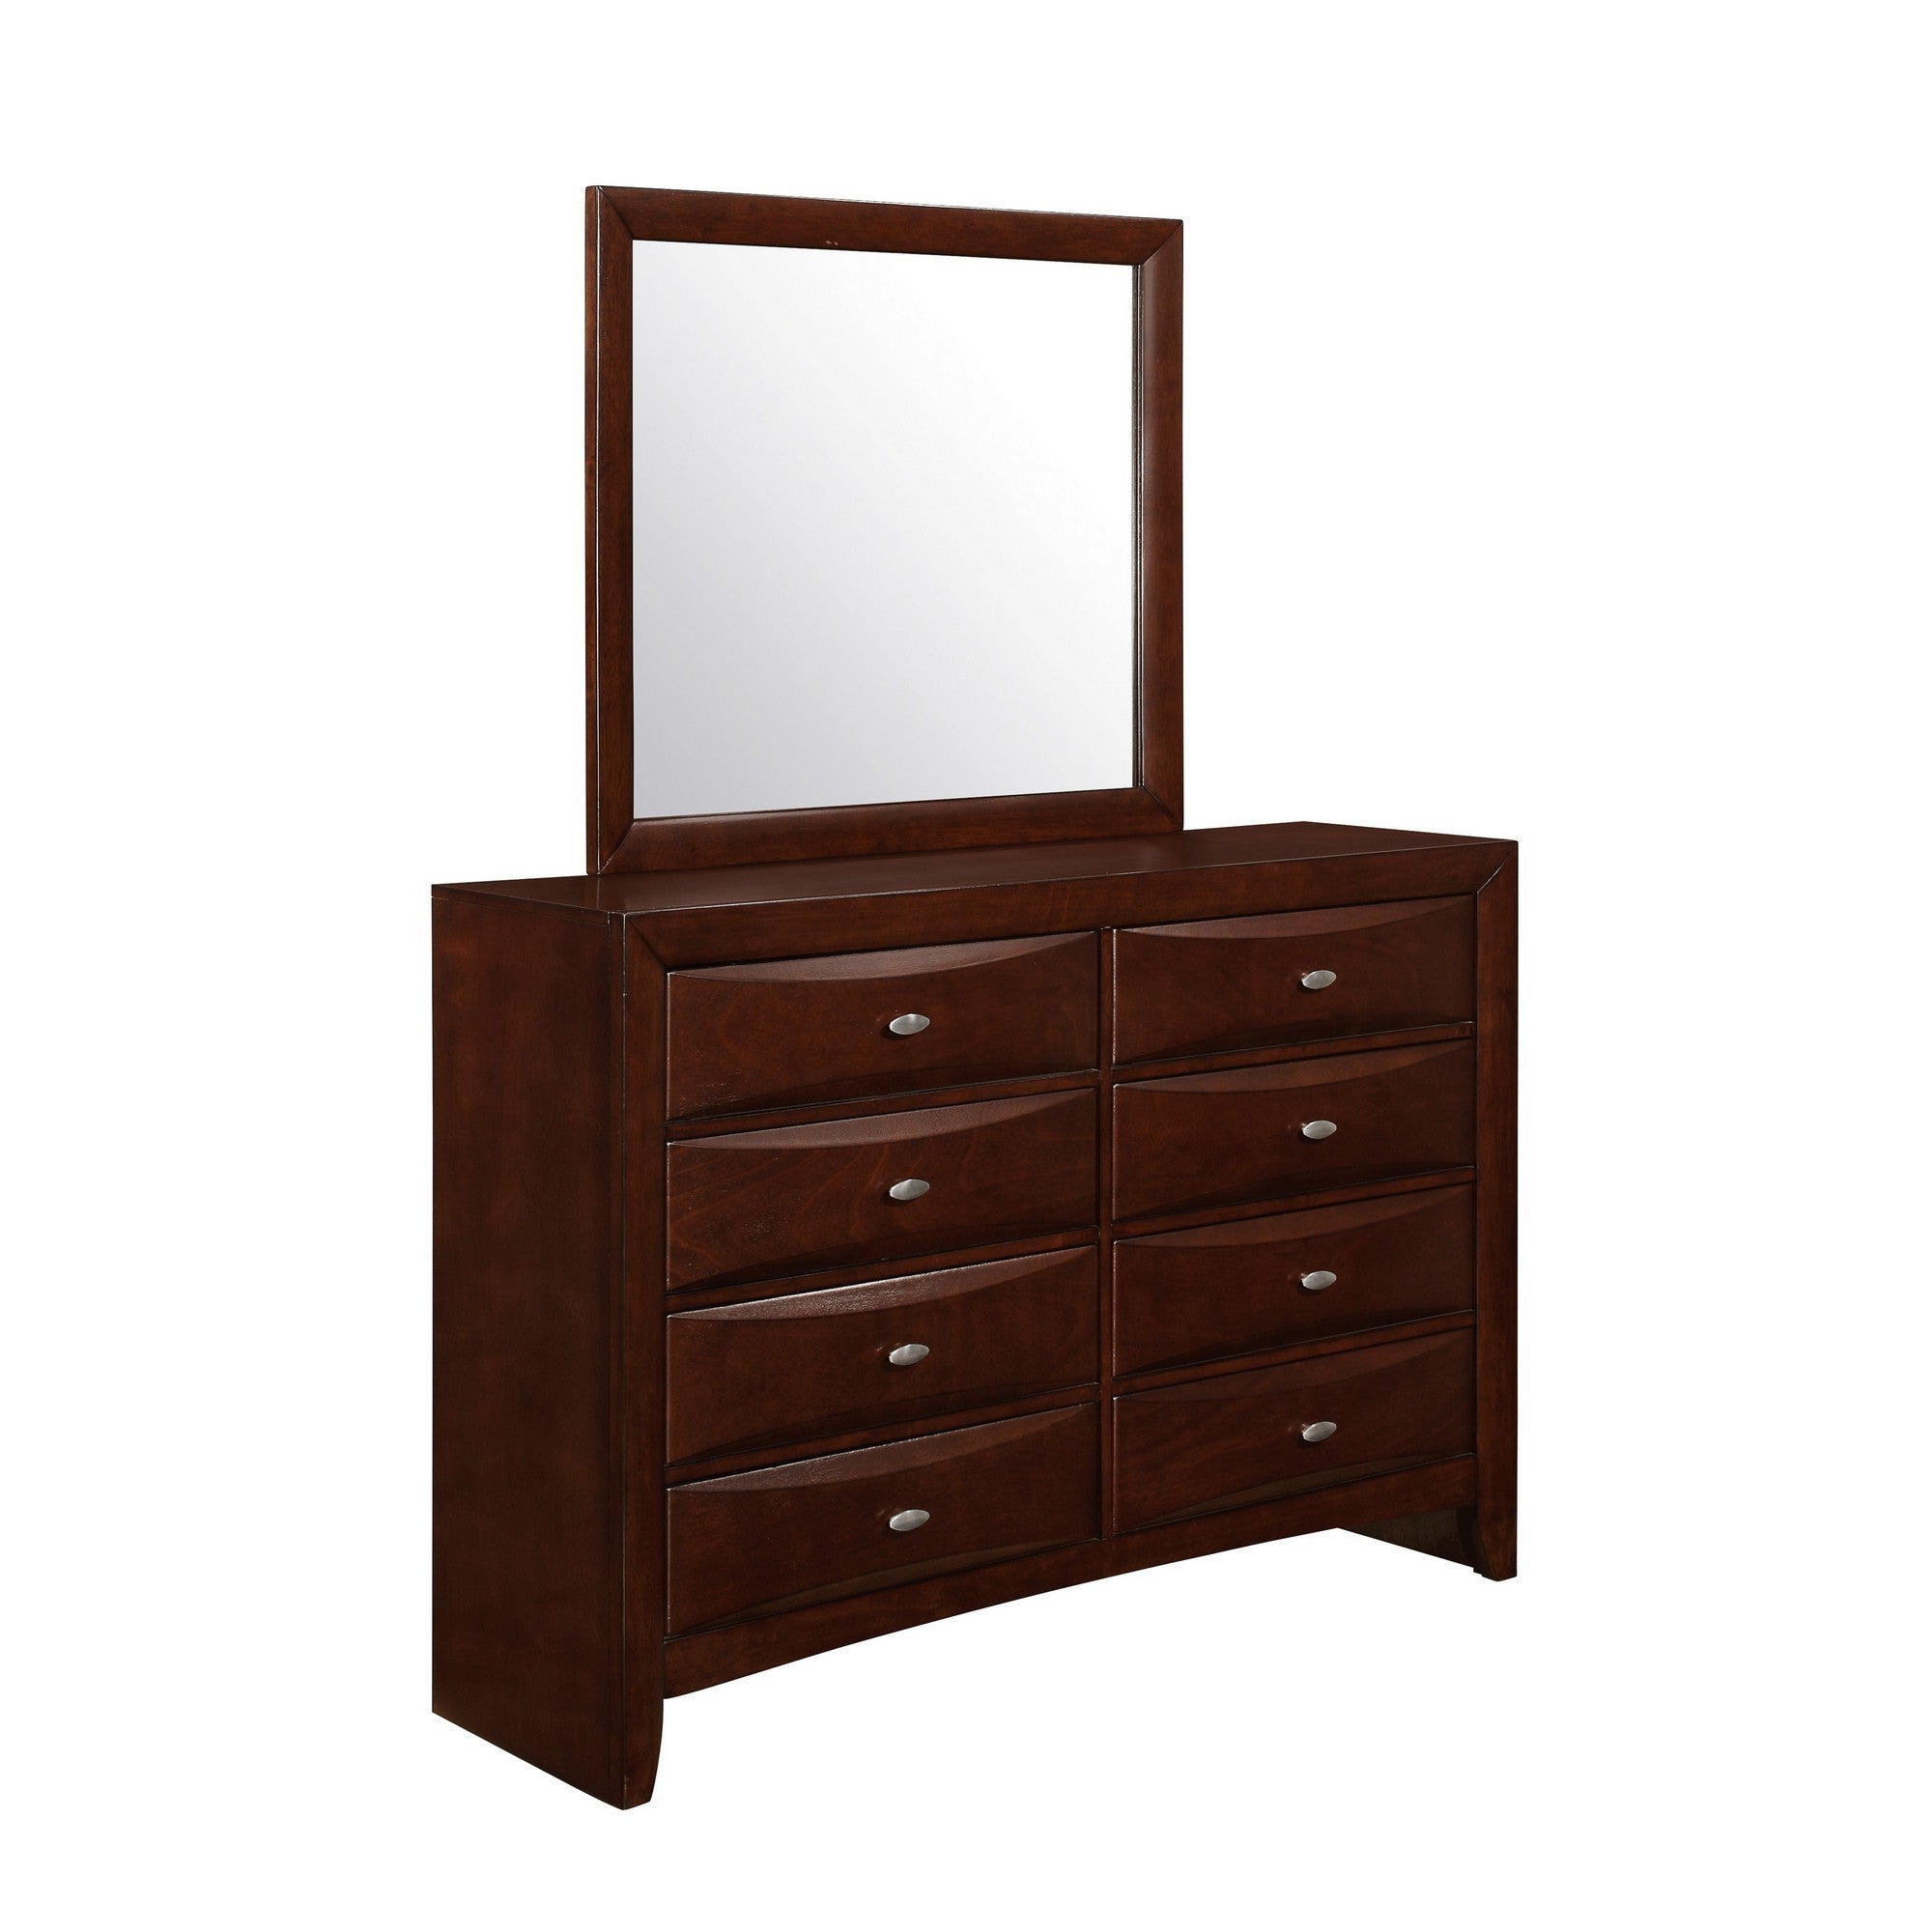 54" Cherry Solid Wood Eight Drawer Double Dresser